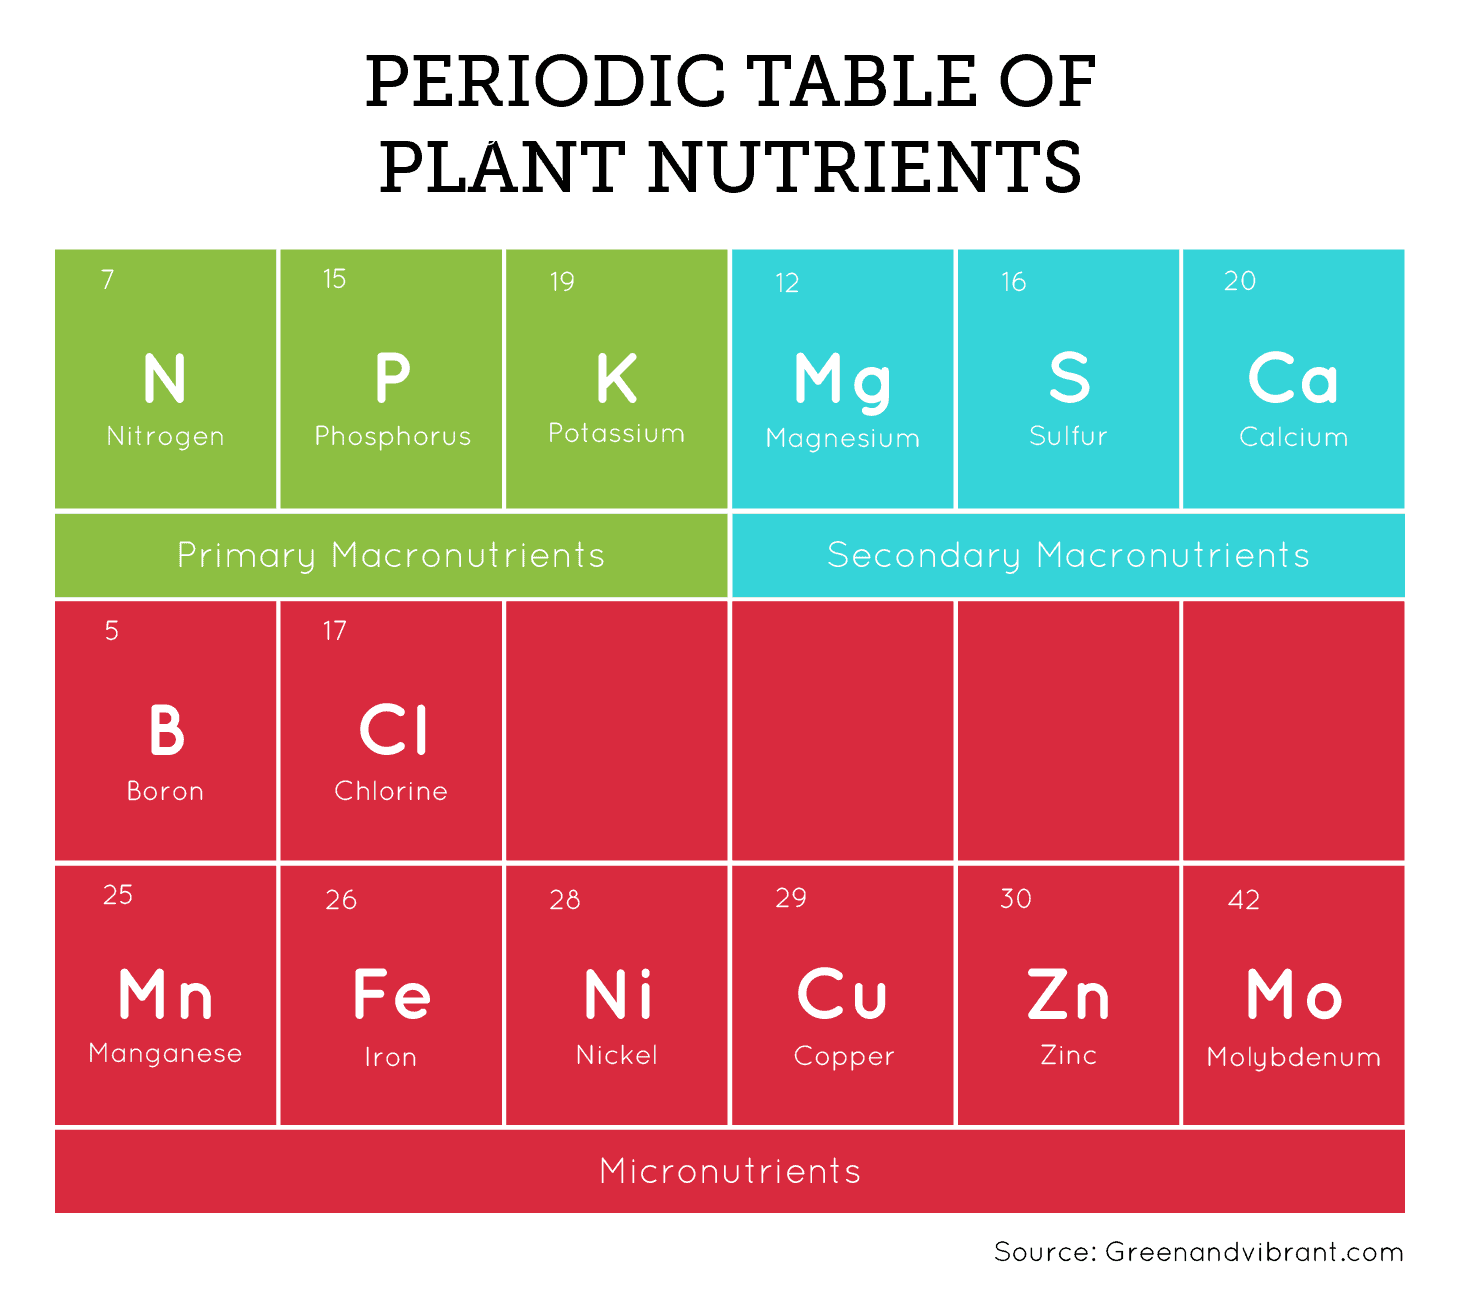 Hydroponic Nutrient Availability Ph Chart